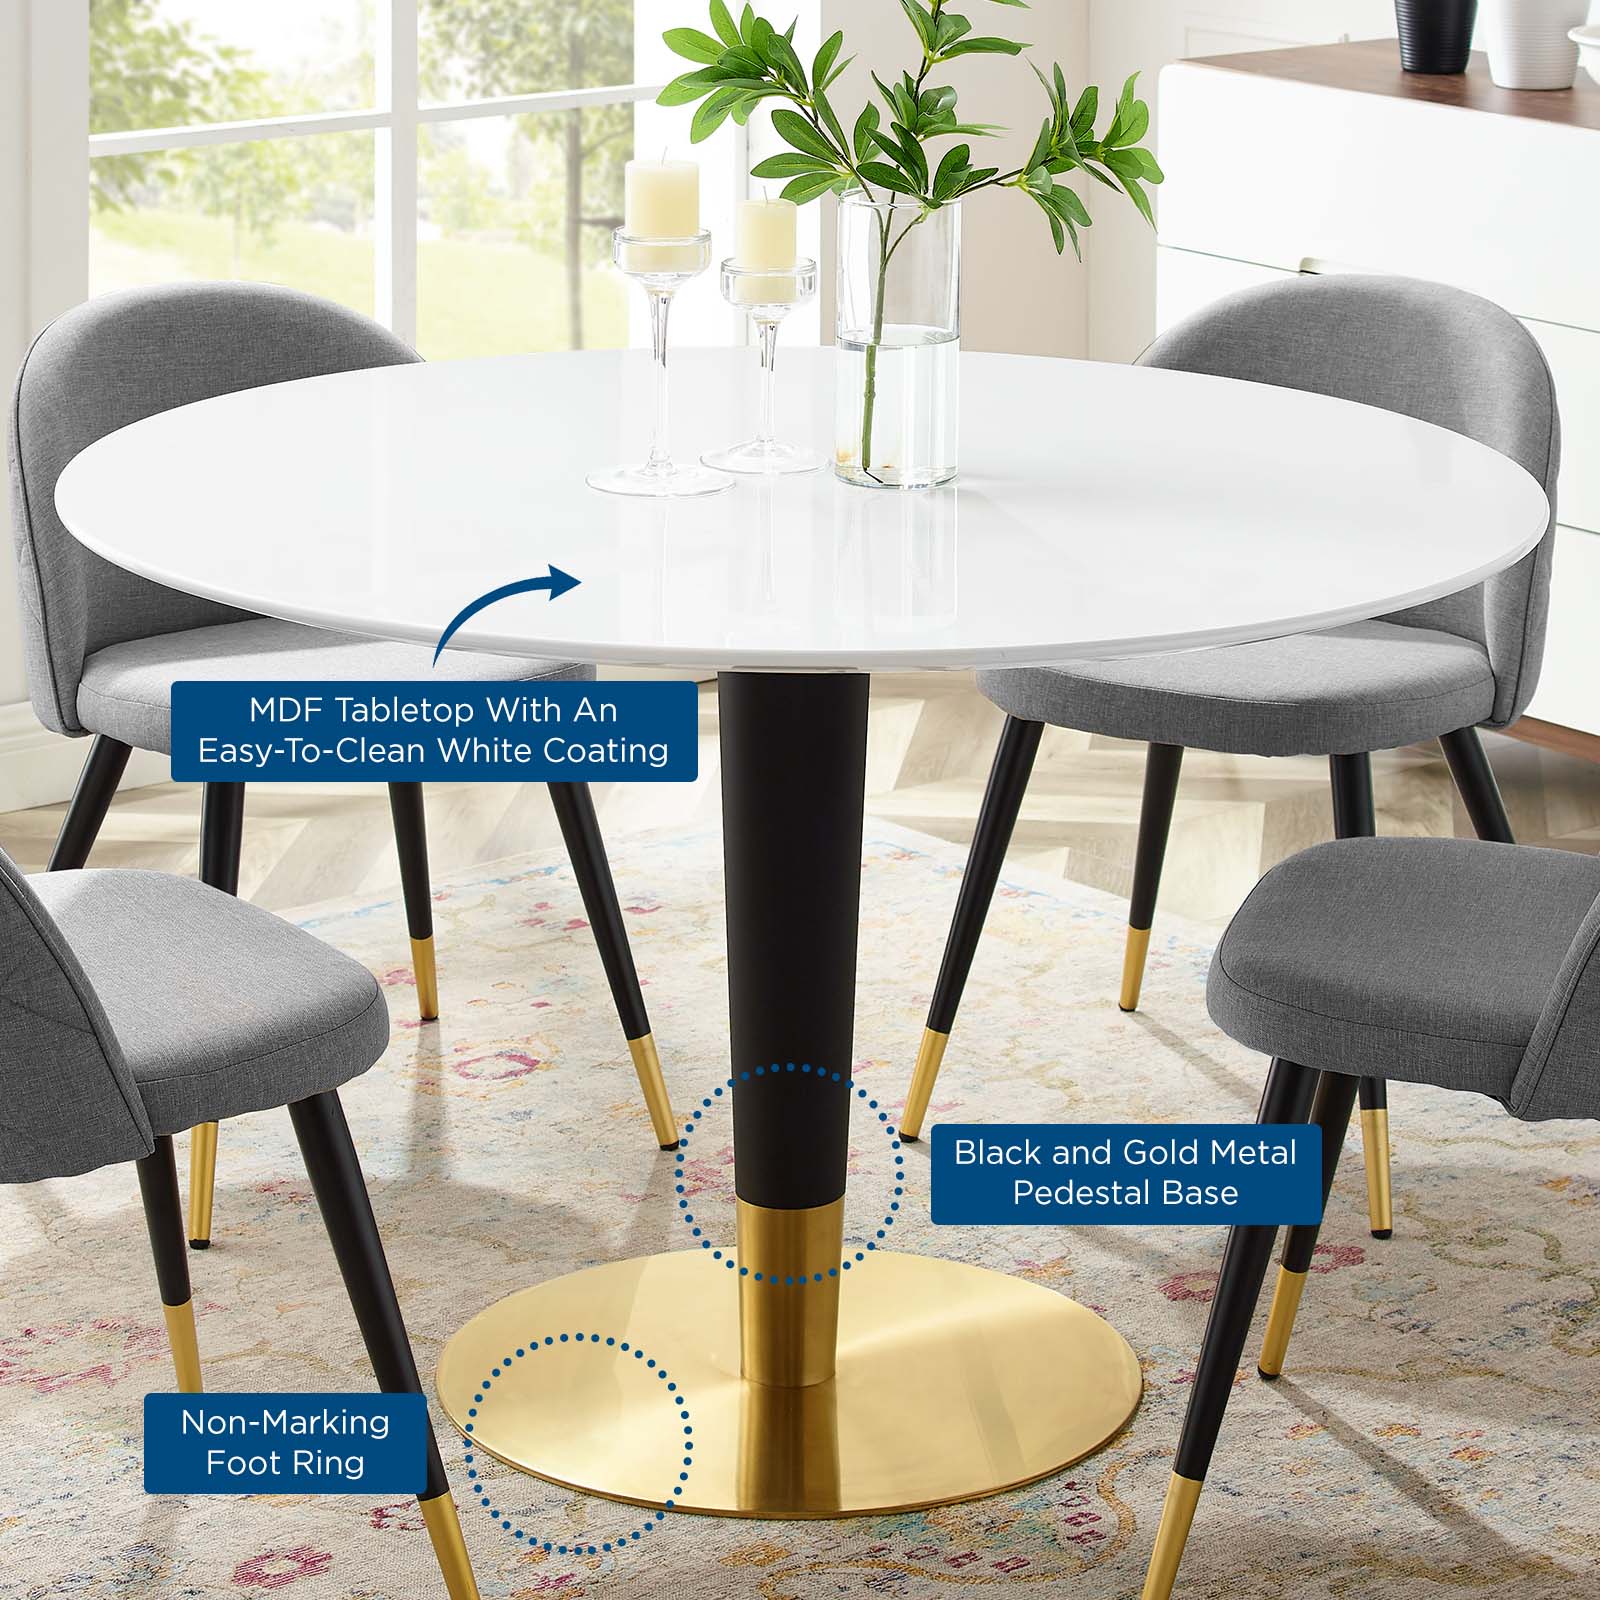 Modway Dining Tables - Zinque 47" Dining Table Gold White